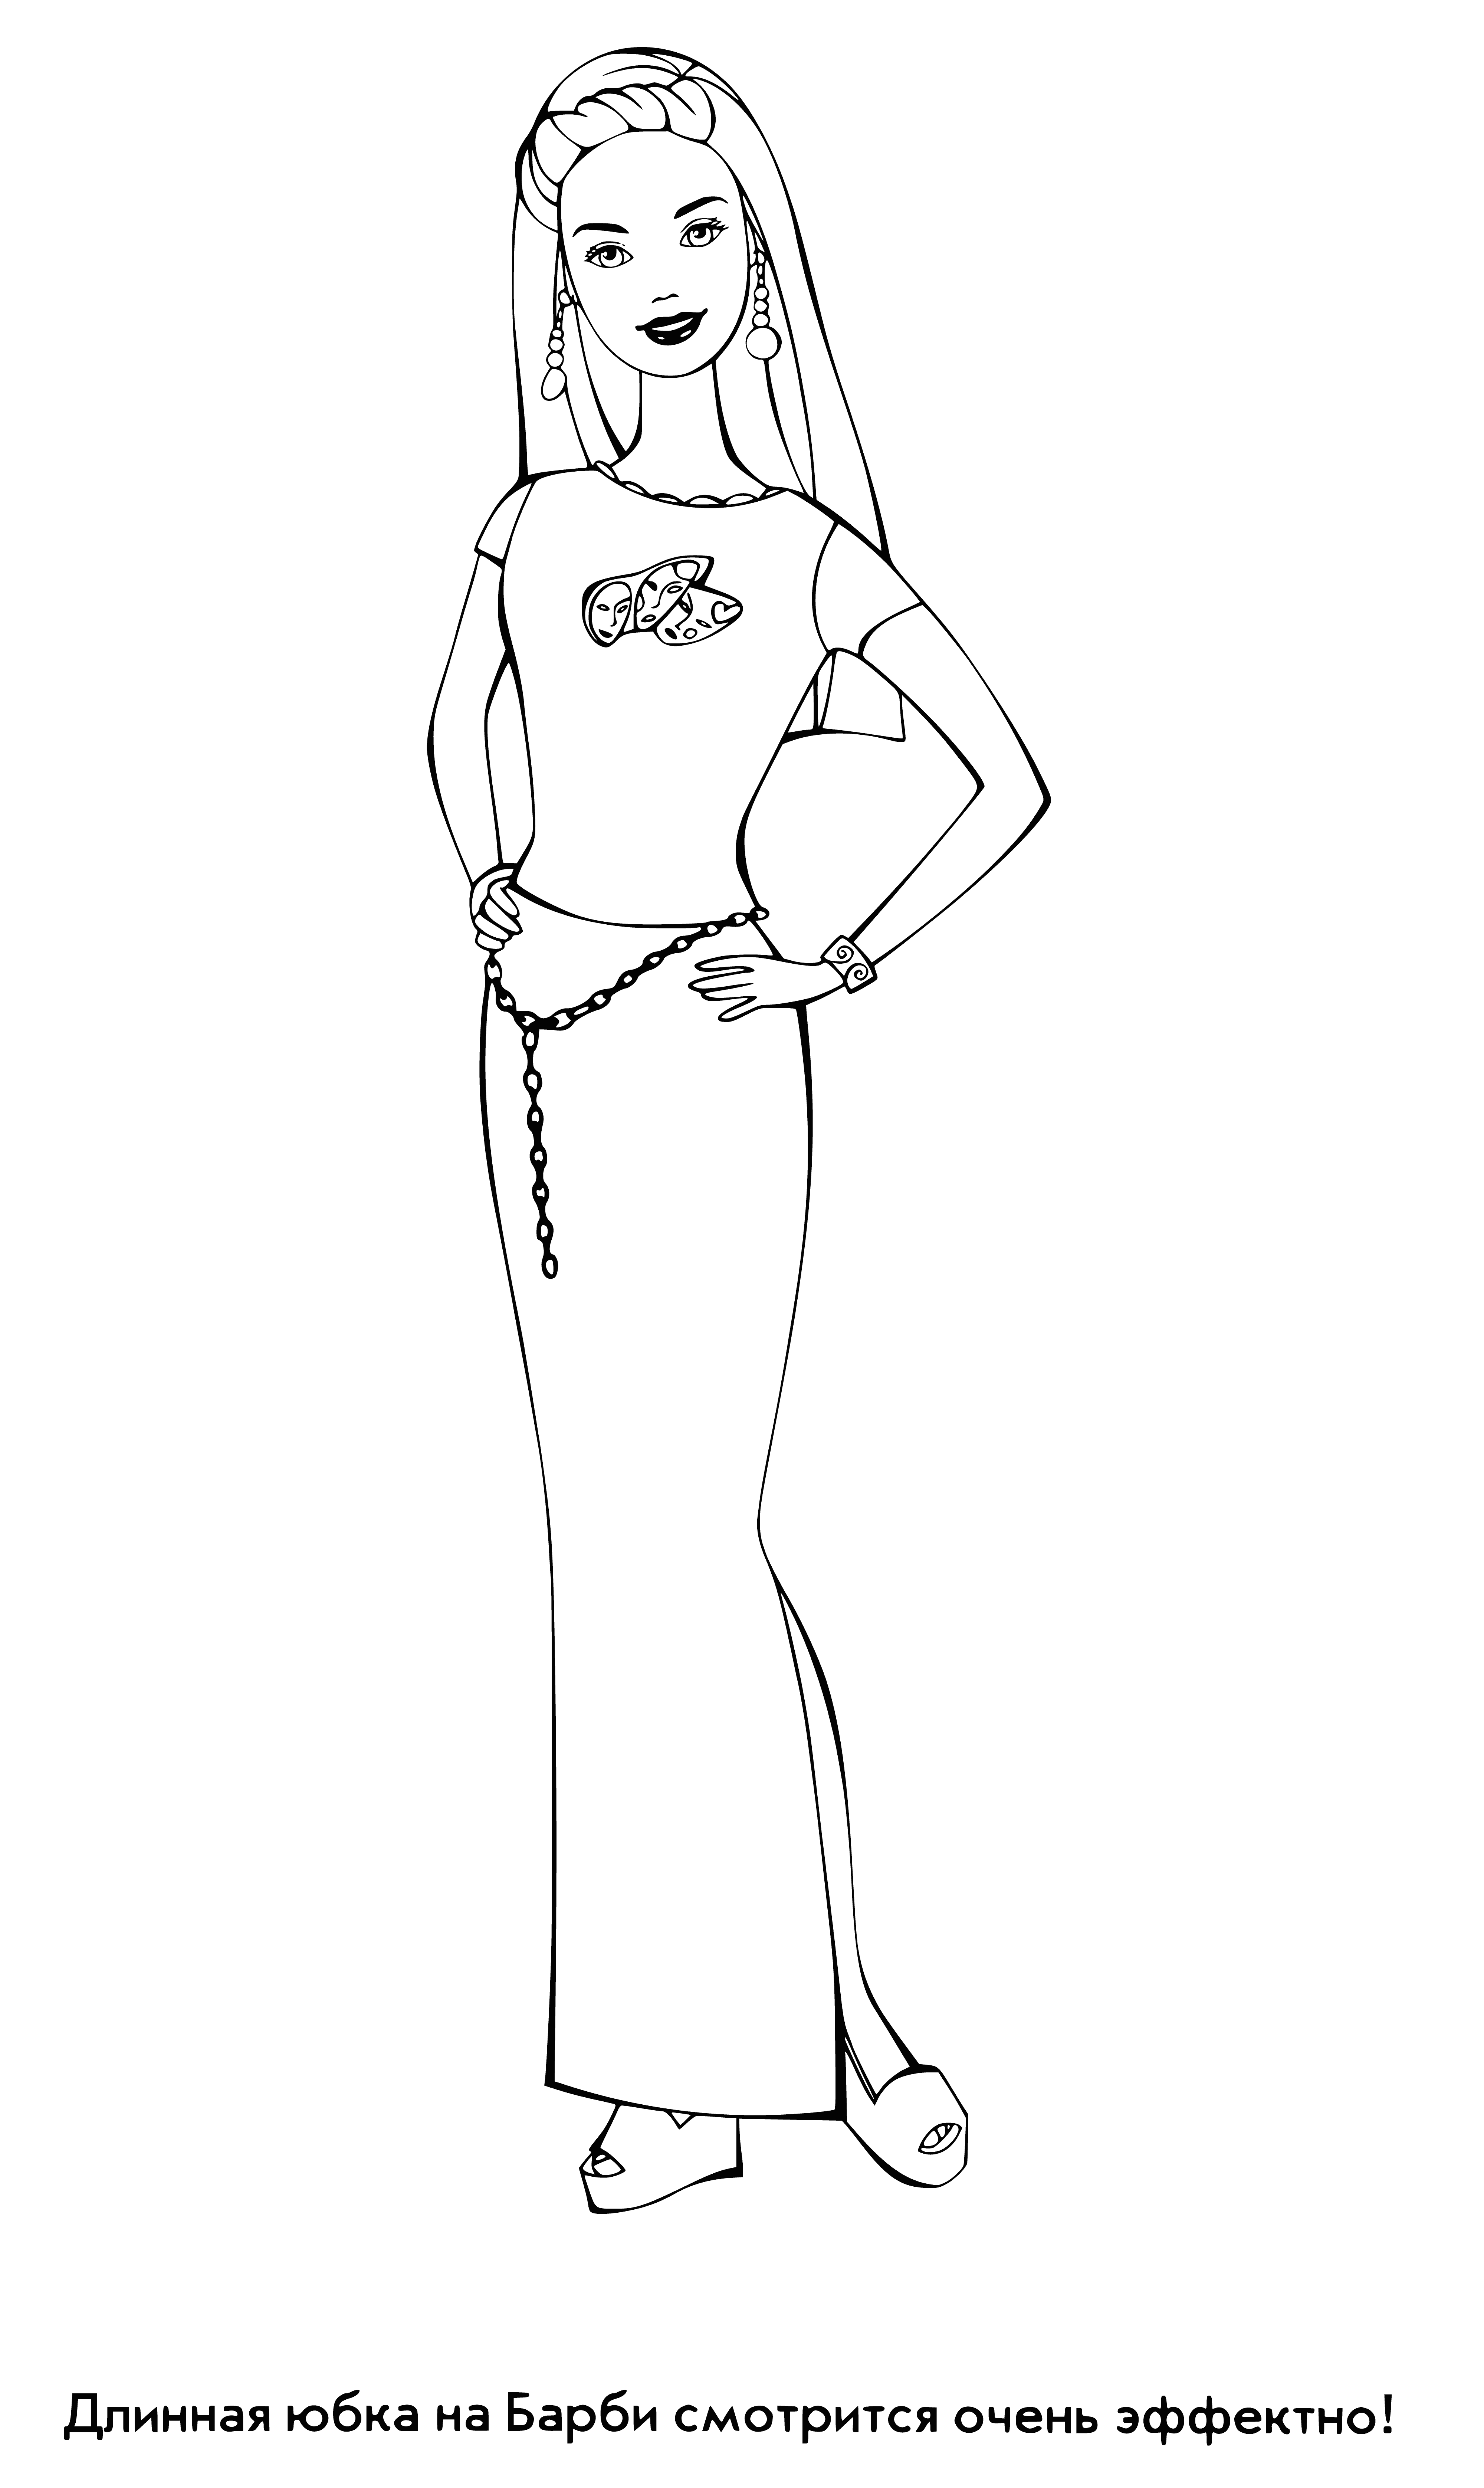 coloring page: Barbie doll has blonde hair and blue eyes, wearing a pink dress and shoes. #coloringpage